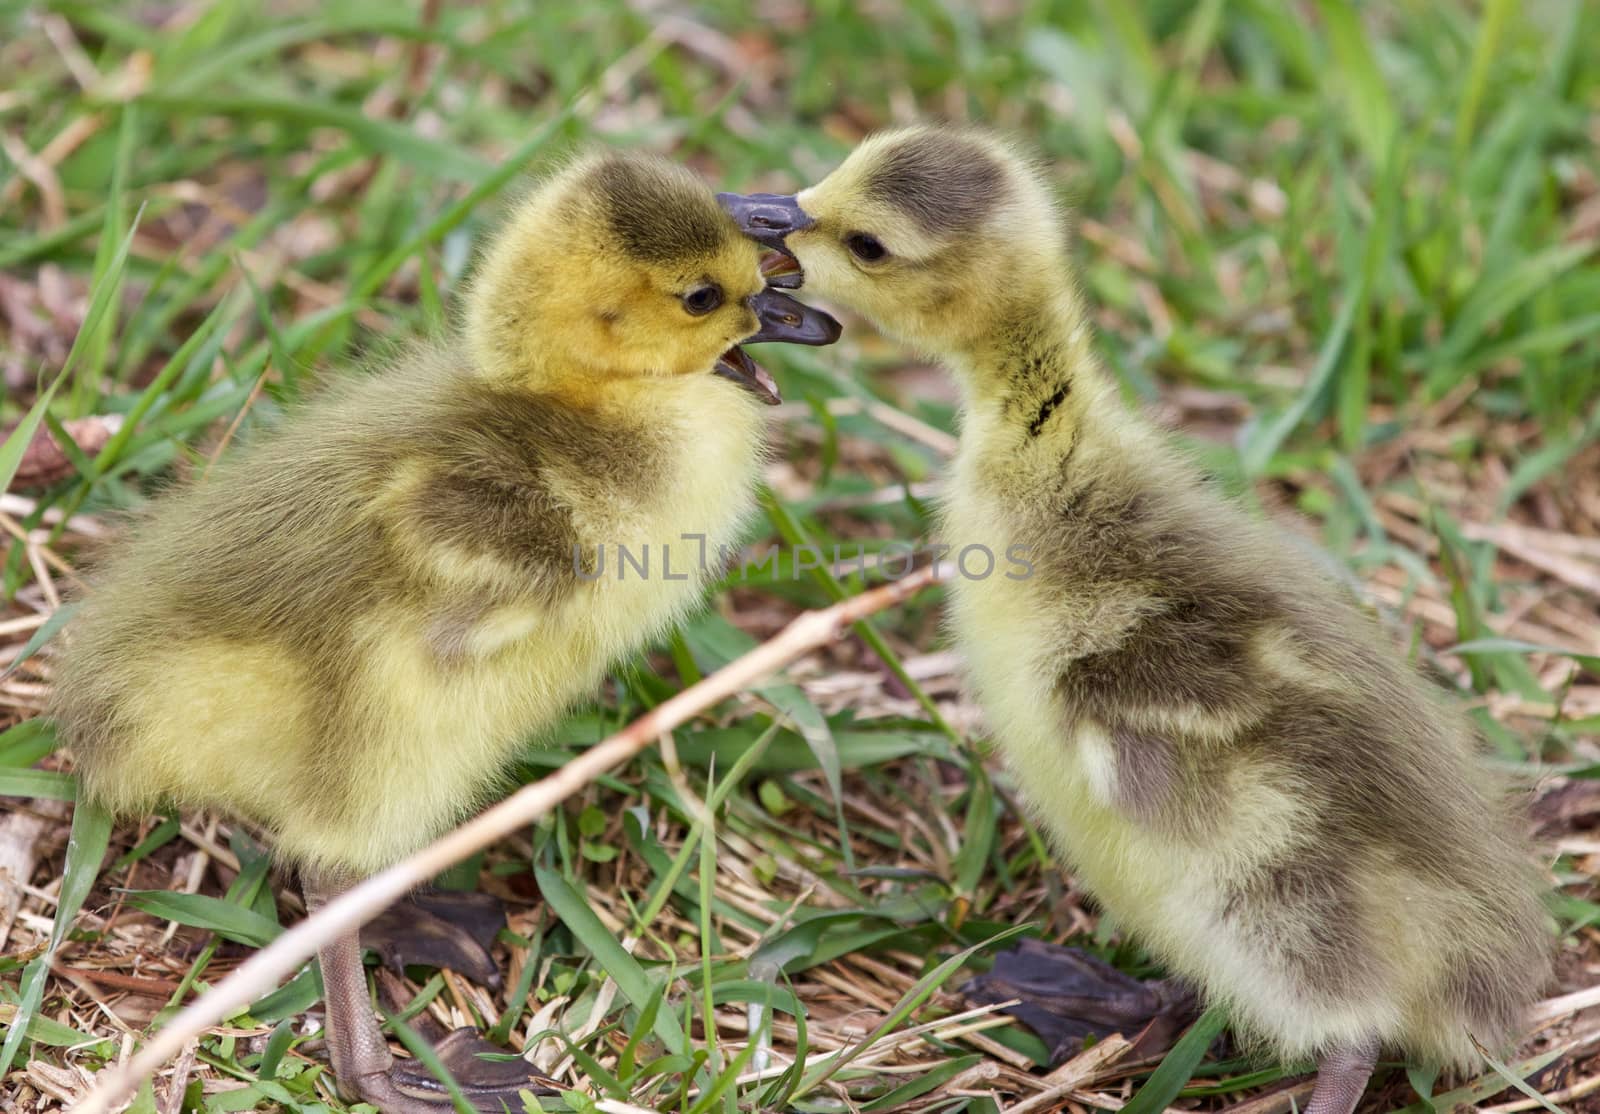 Funny image with the kissing cute young chicks of the Canada geese